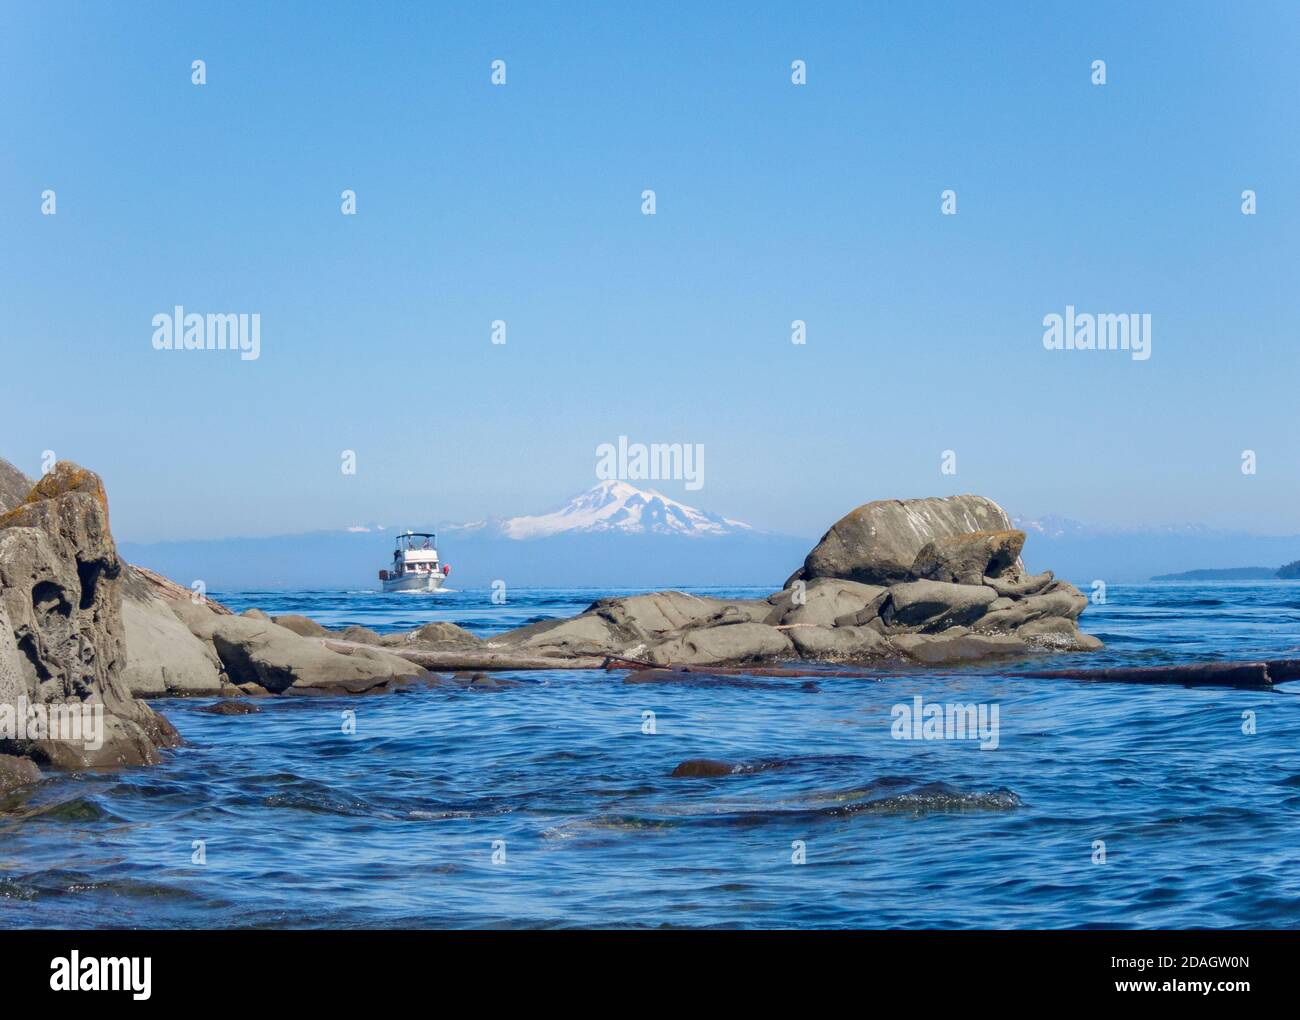 An eroded sandstone reef frames a view of a motor yacht approaching from the Strait of Georgia and in the distance, Mt. Baker's snowy peak Stock Photo